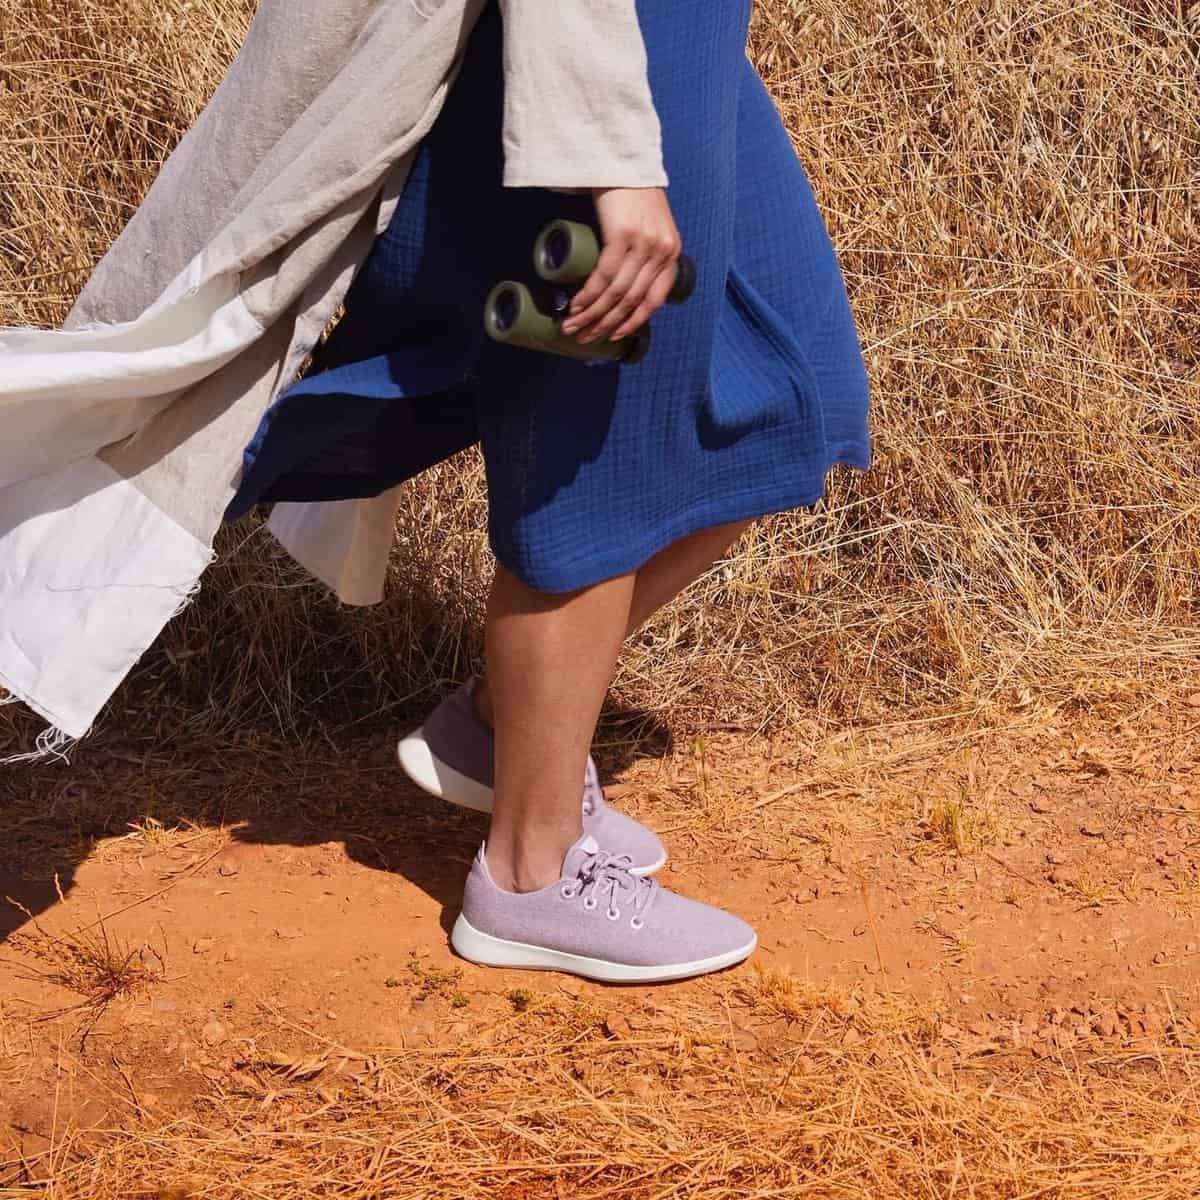 woman walking outdoors wearing a pair of Allbirds shoes